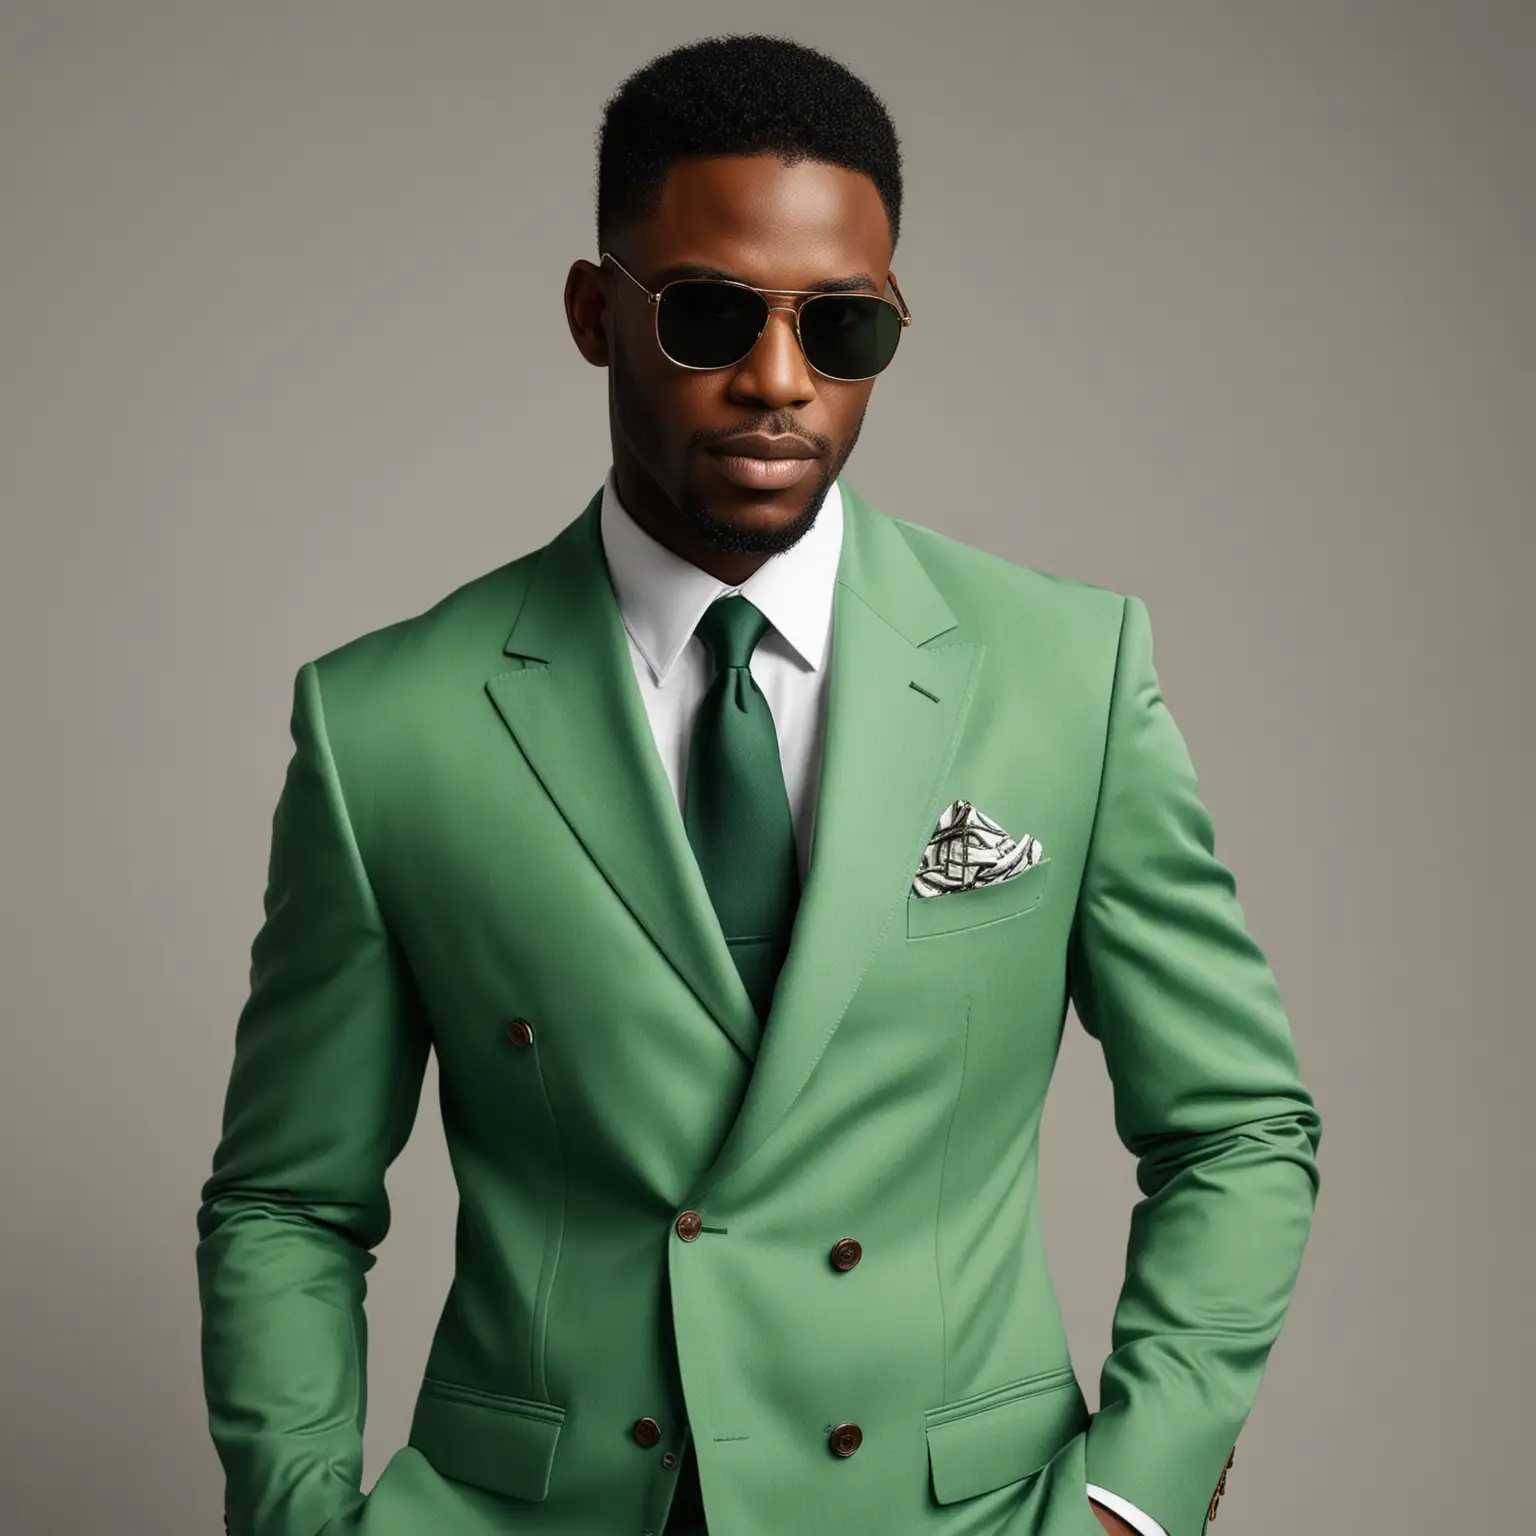 Stylish African American Man Wearing Vibrant Green Suit and Sunglasses